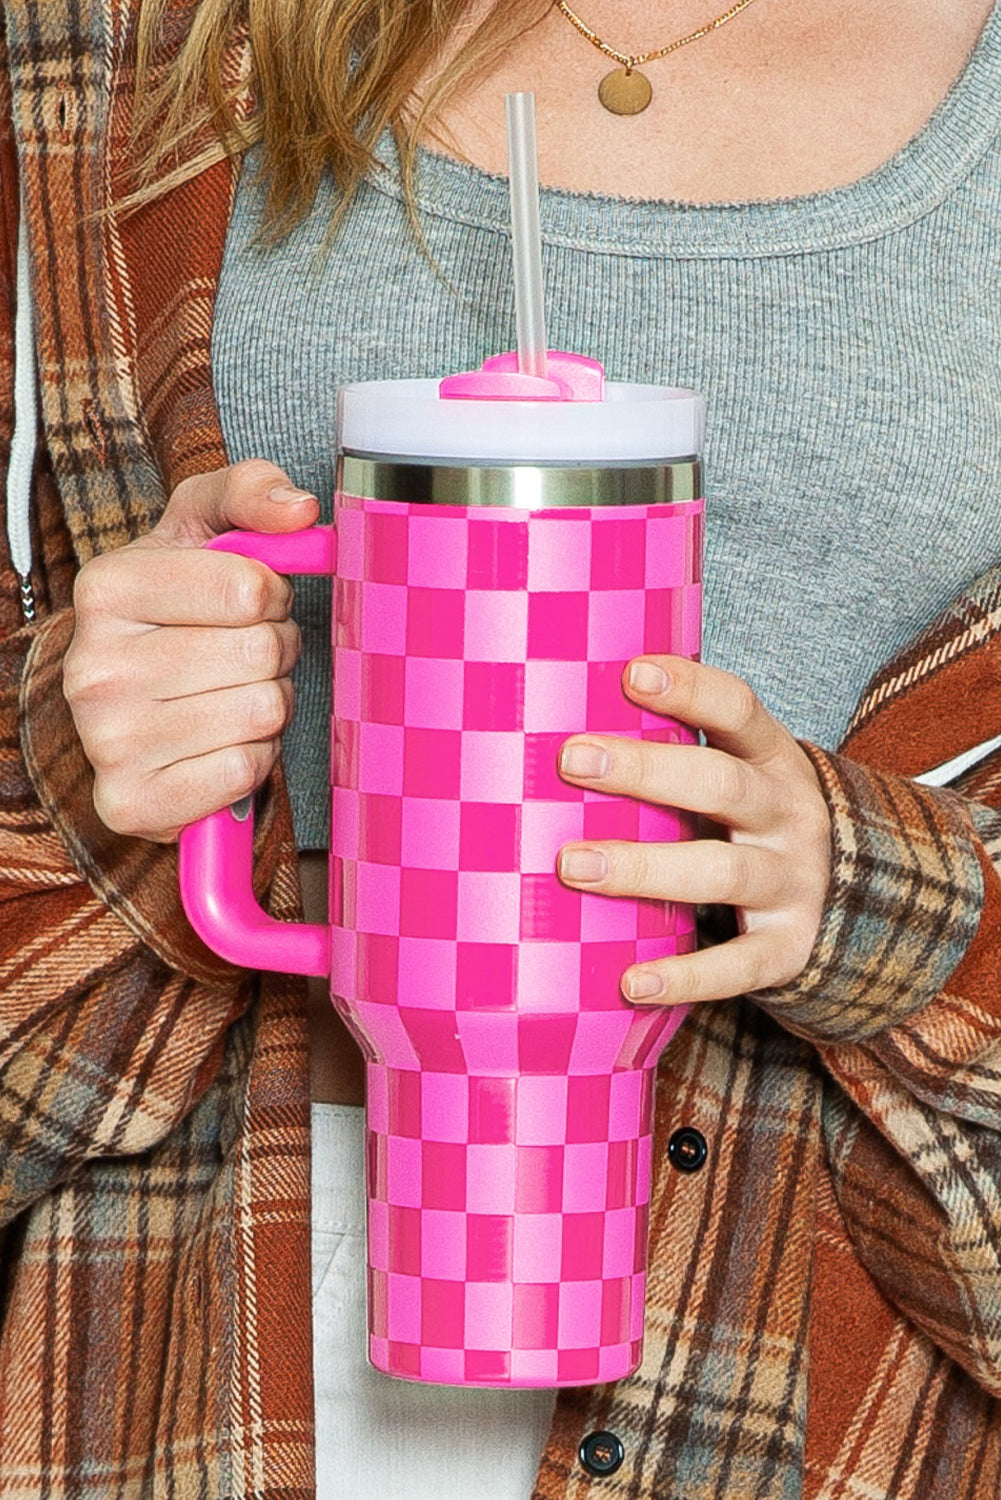 Bright Pink Checkered Print Handled Stainless Steel Tumbler Cup 40oz